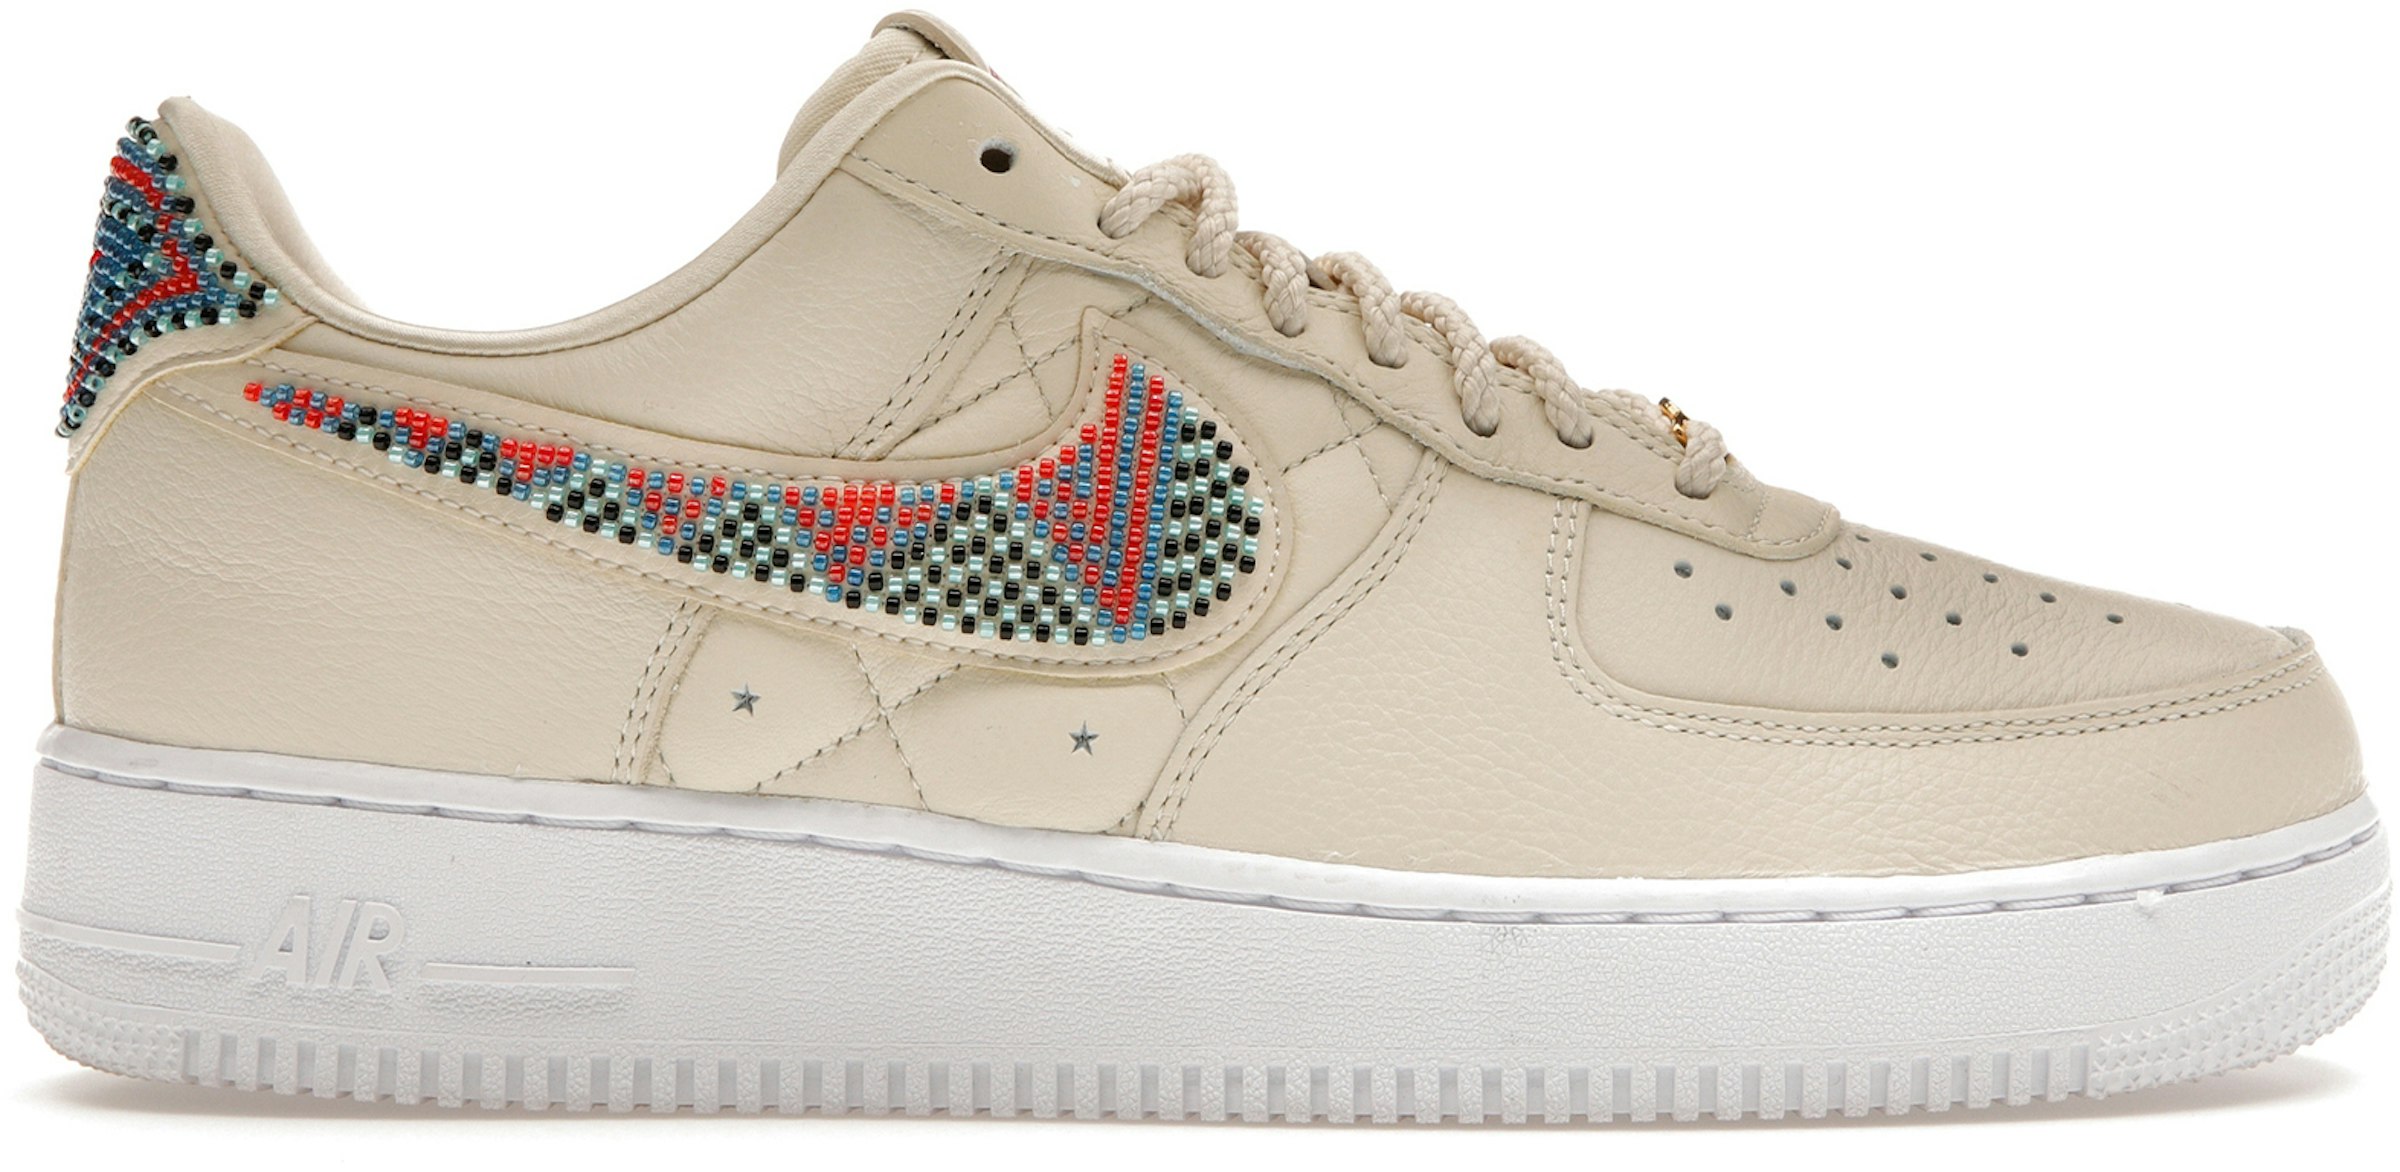 Buy Women's Nike Air Force 1 Size Shoes & New Sneakers - StockX